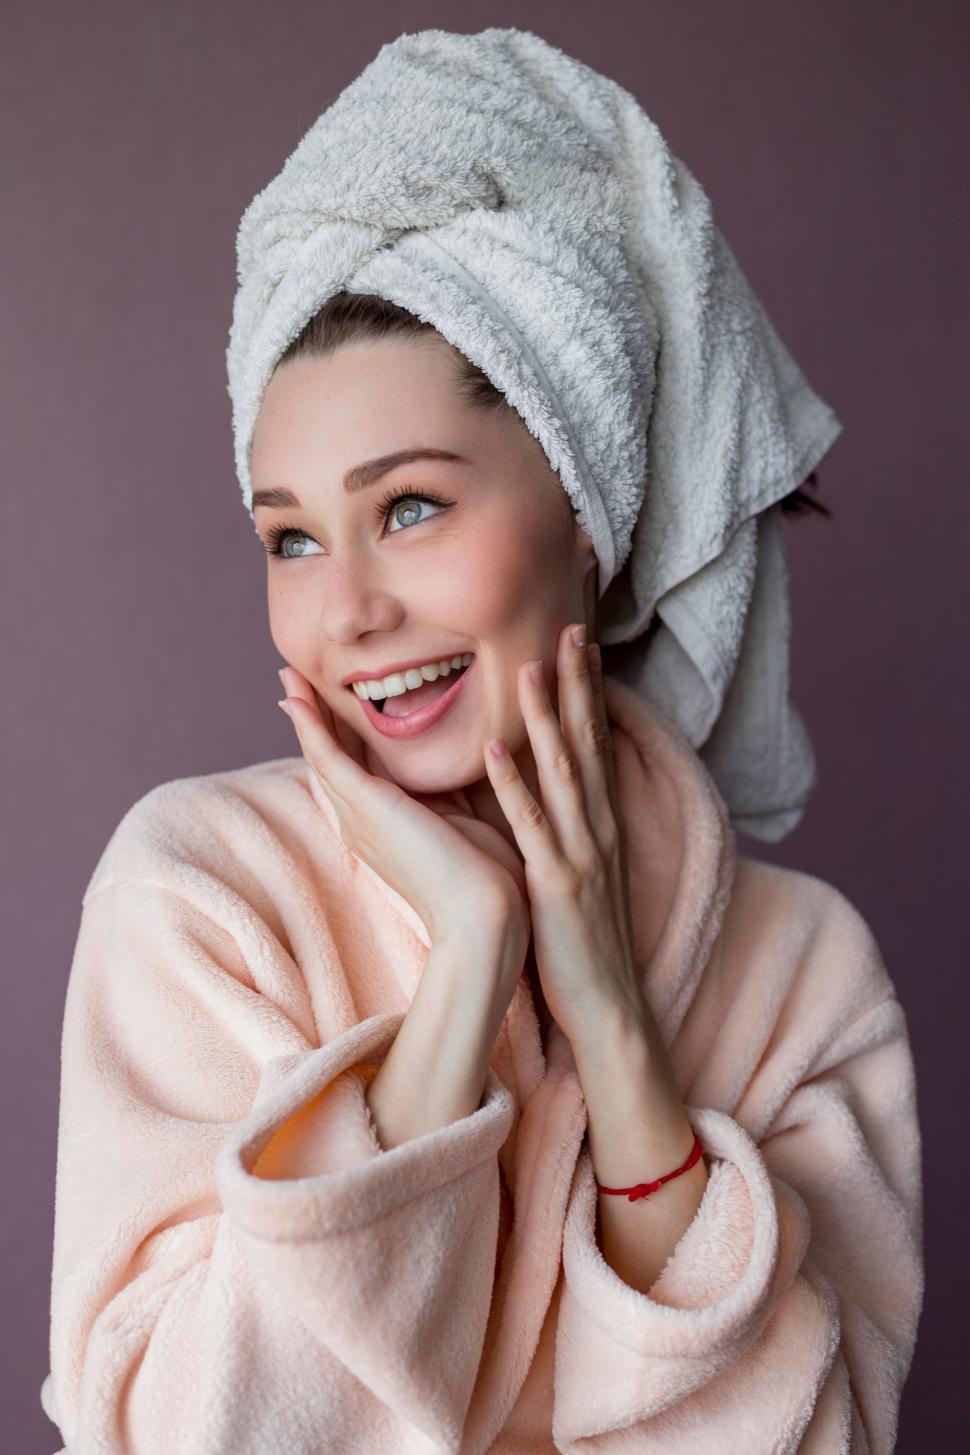 Download Free Stock Photo of Smiling young woman wearing bathrobe and towel 